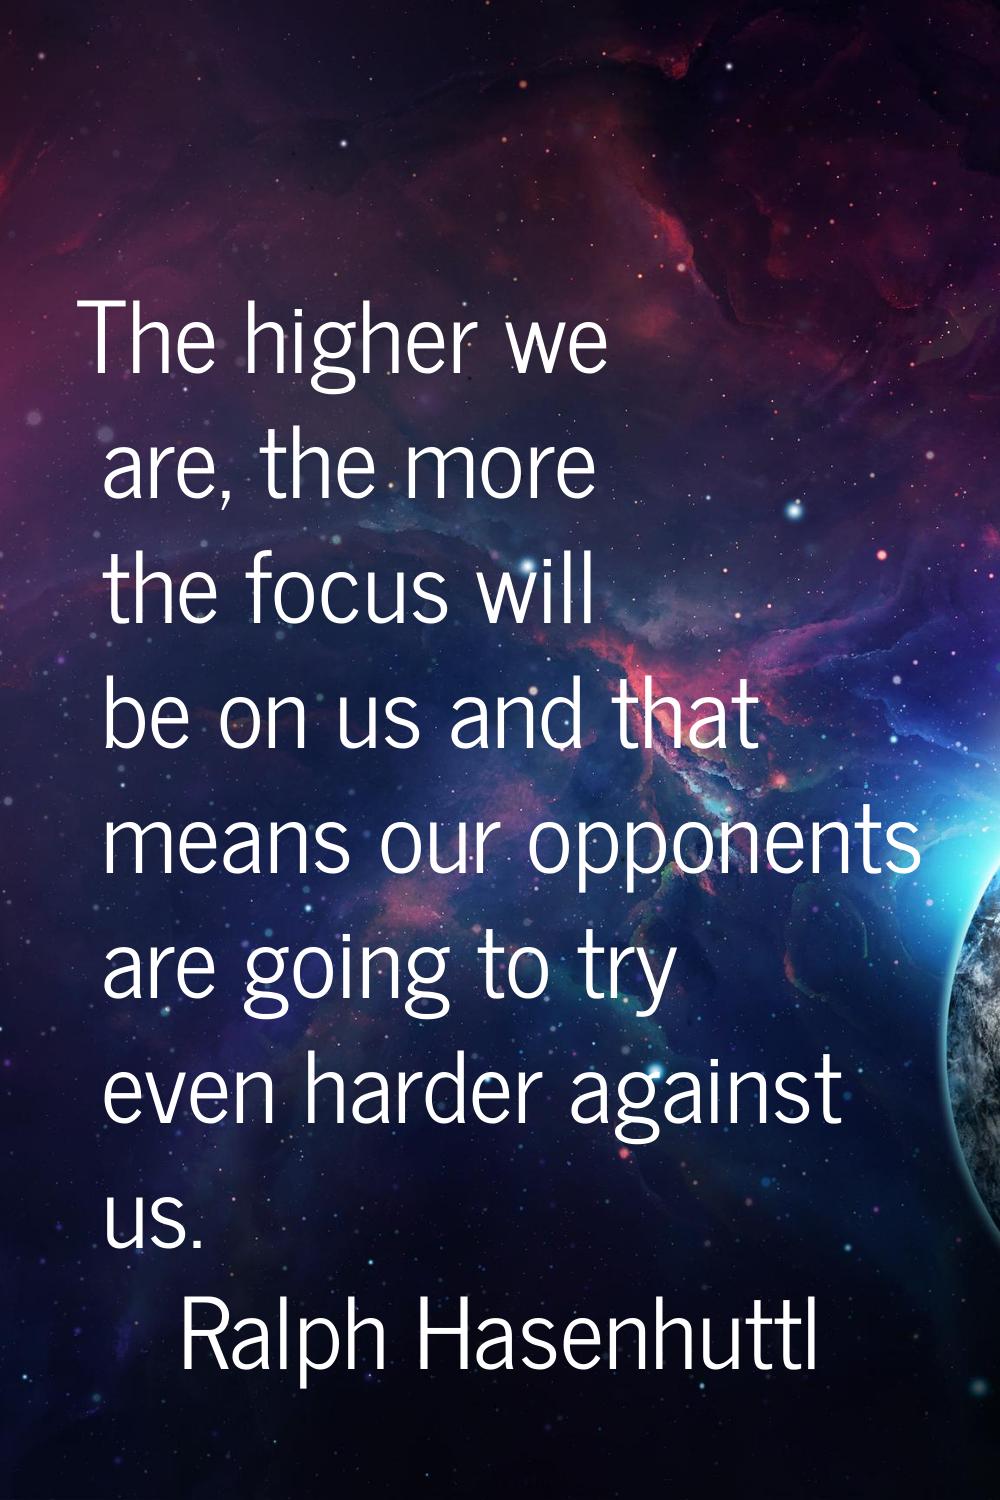 The higher we are, the more the focus will be on us and that means our opponents are going to try e